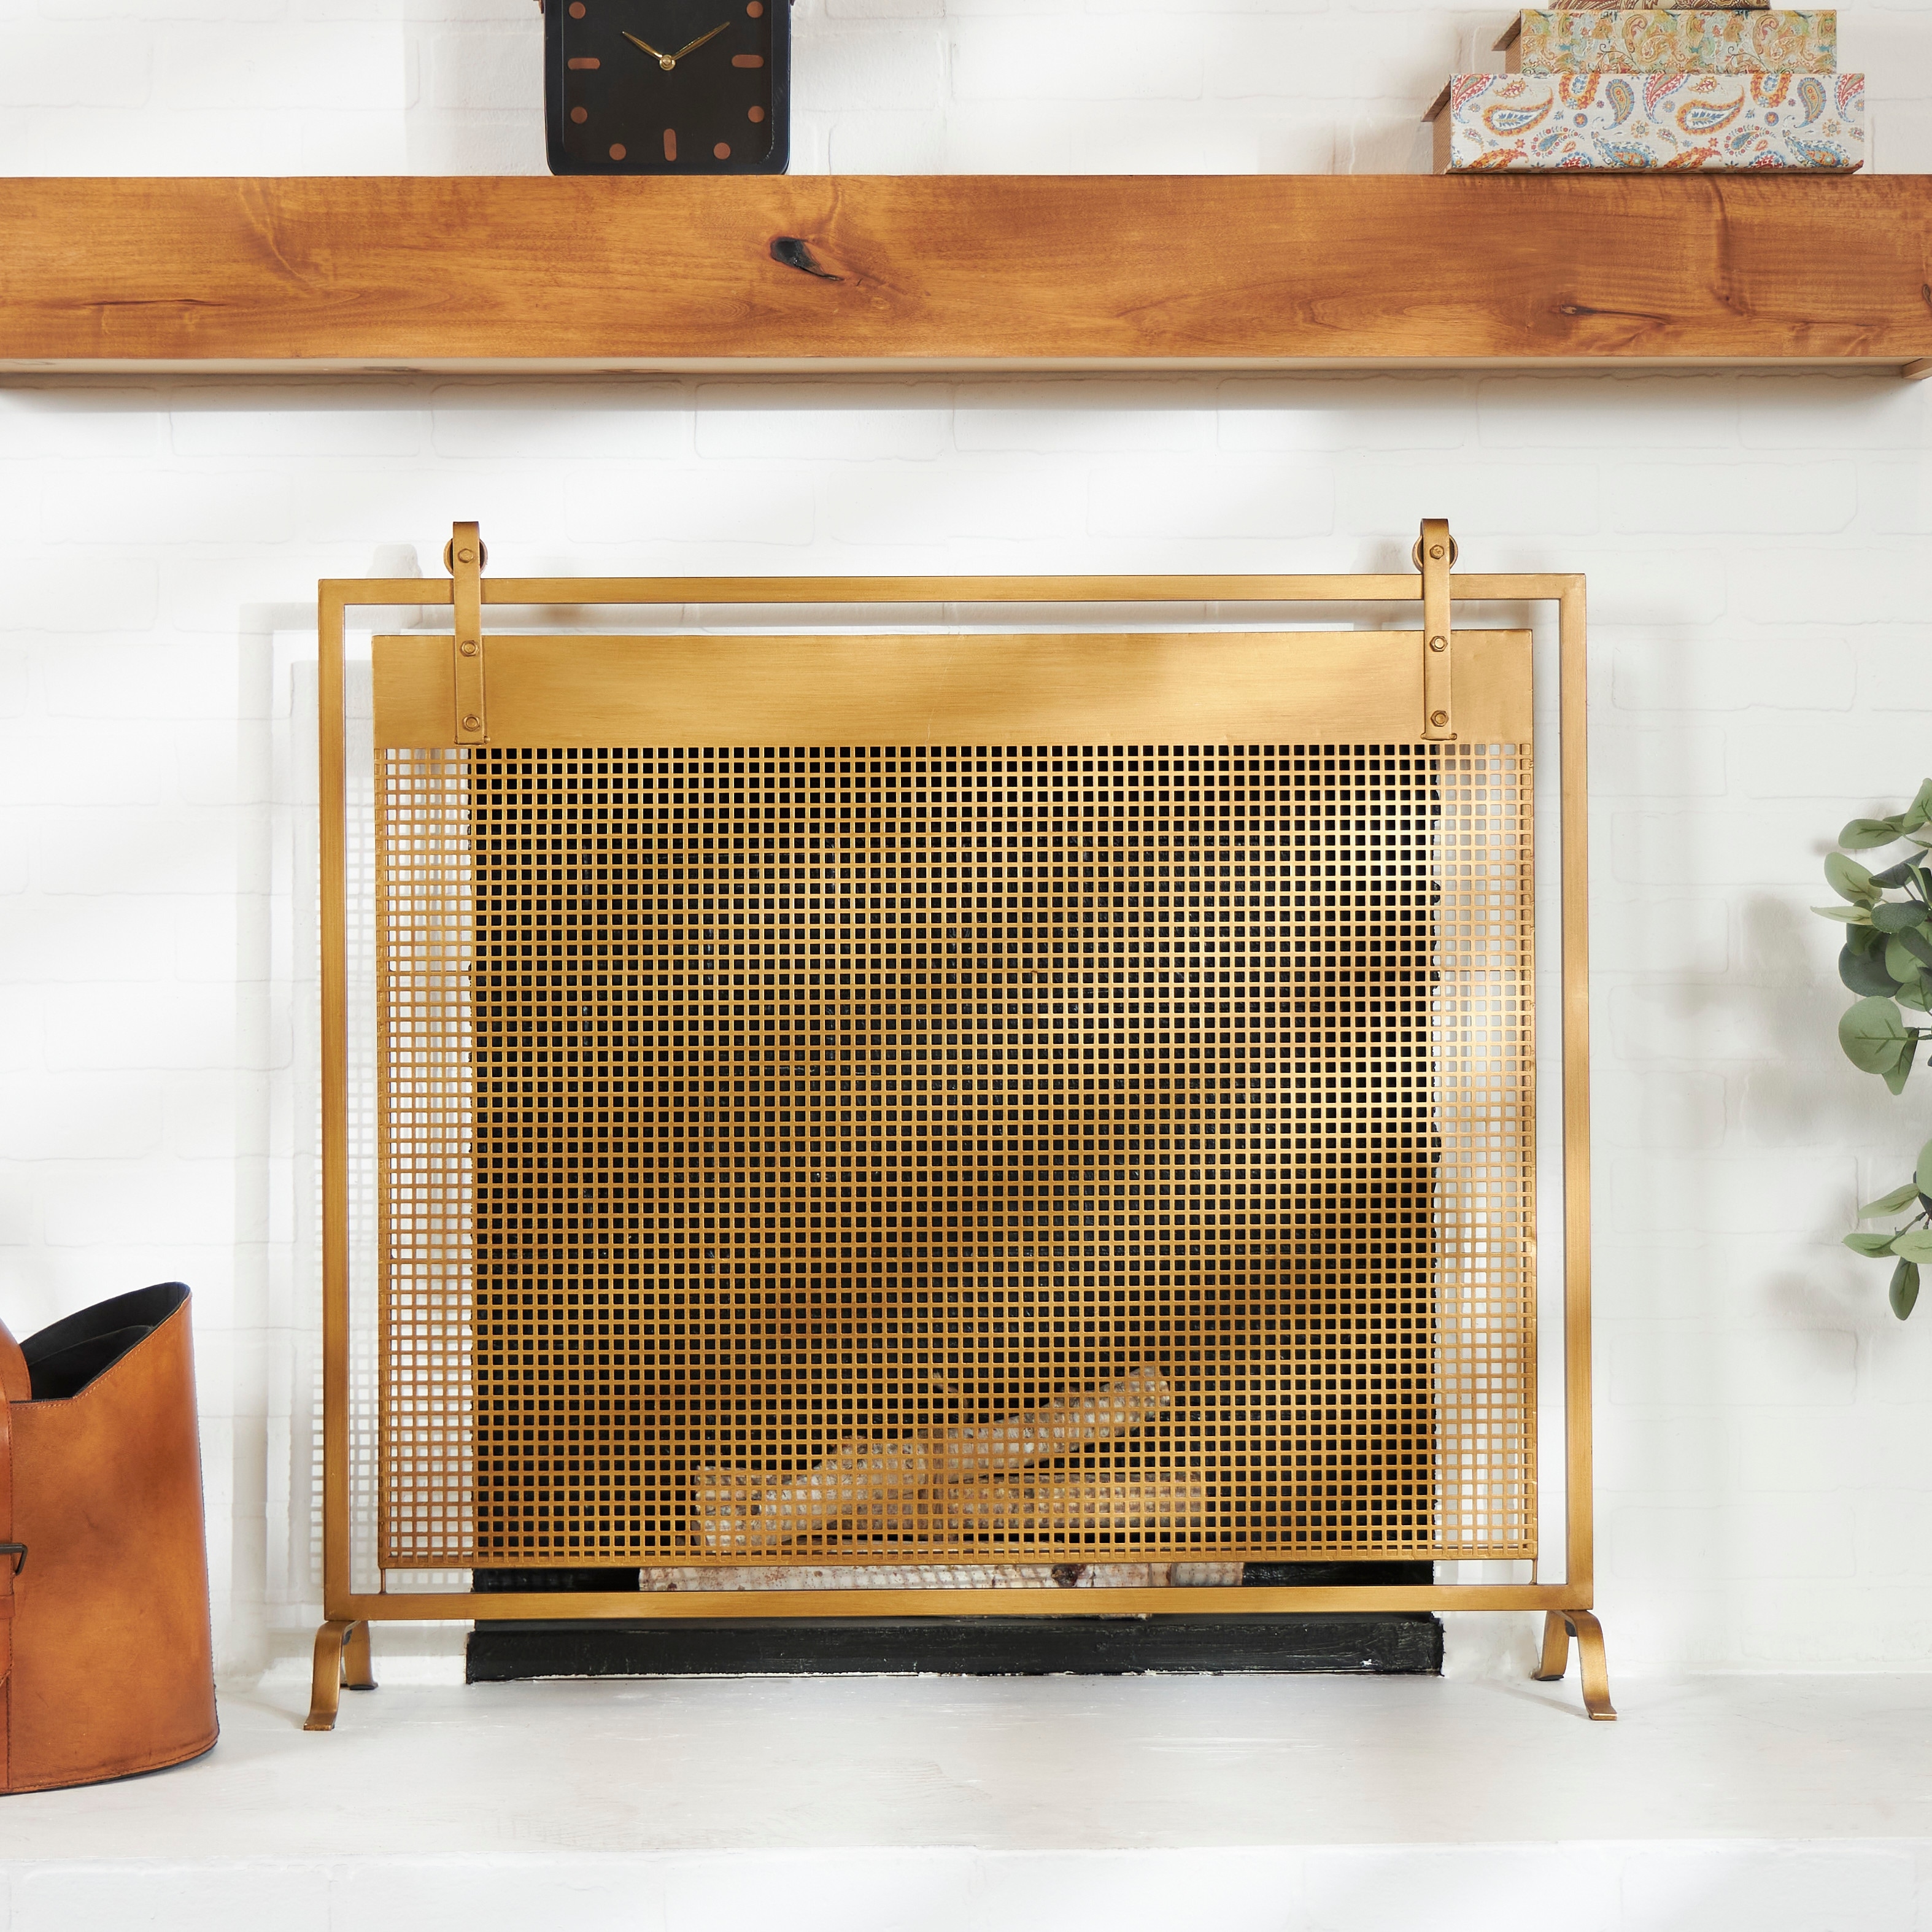 Studio 350 Copper Metal Suspended Grid Style Netting Single Panel Fireplace Screen with Bolted Detailing